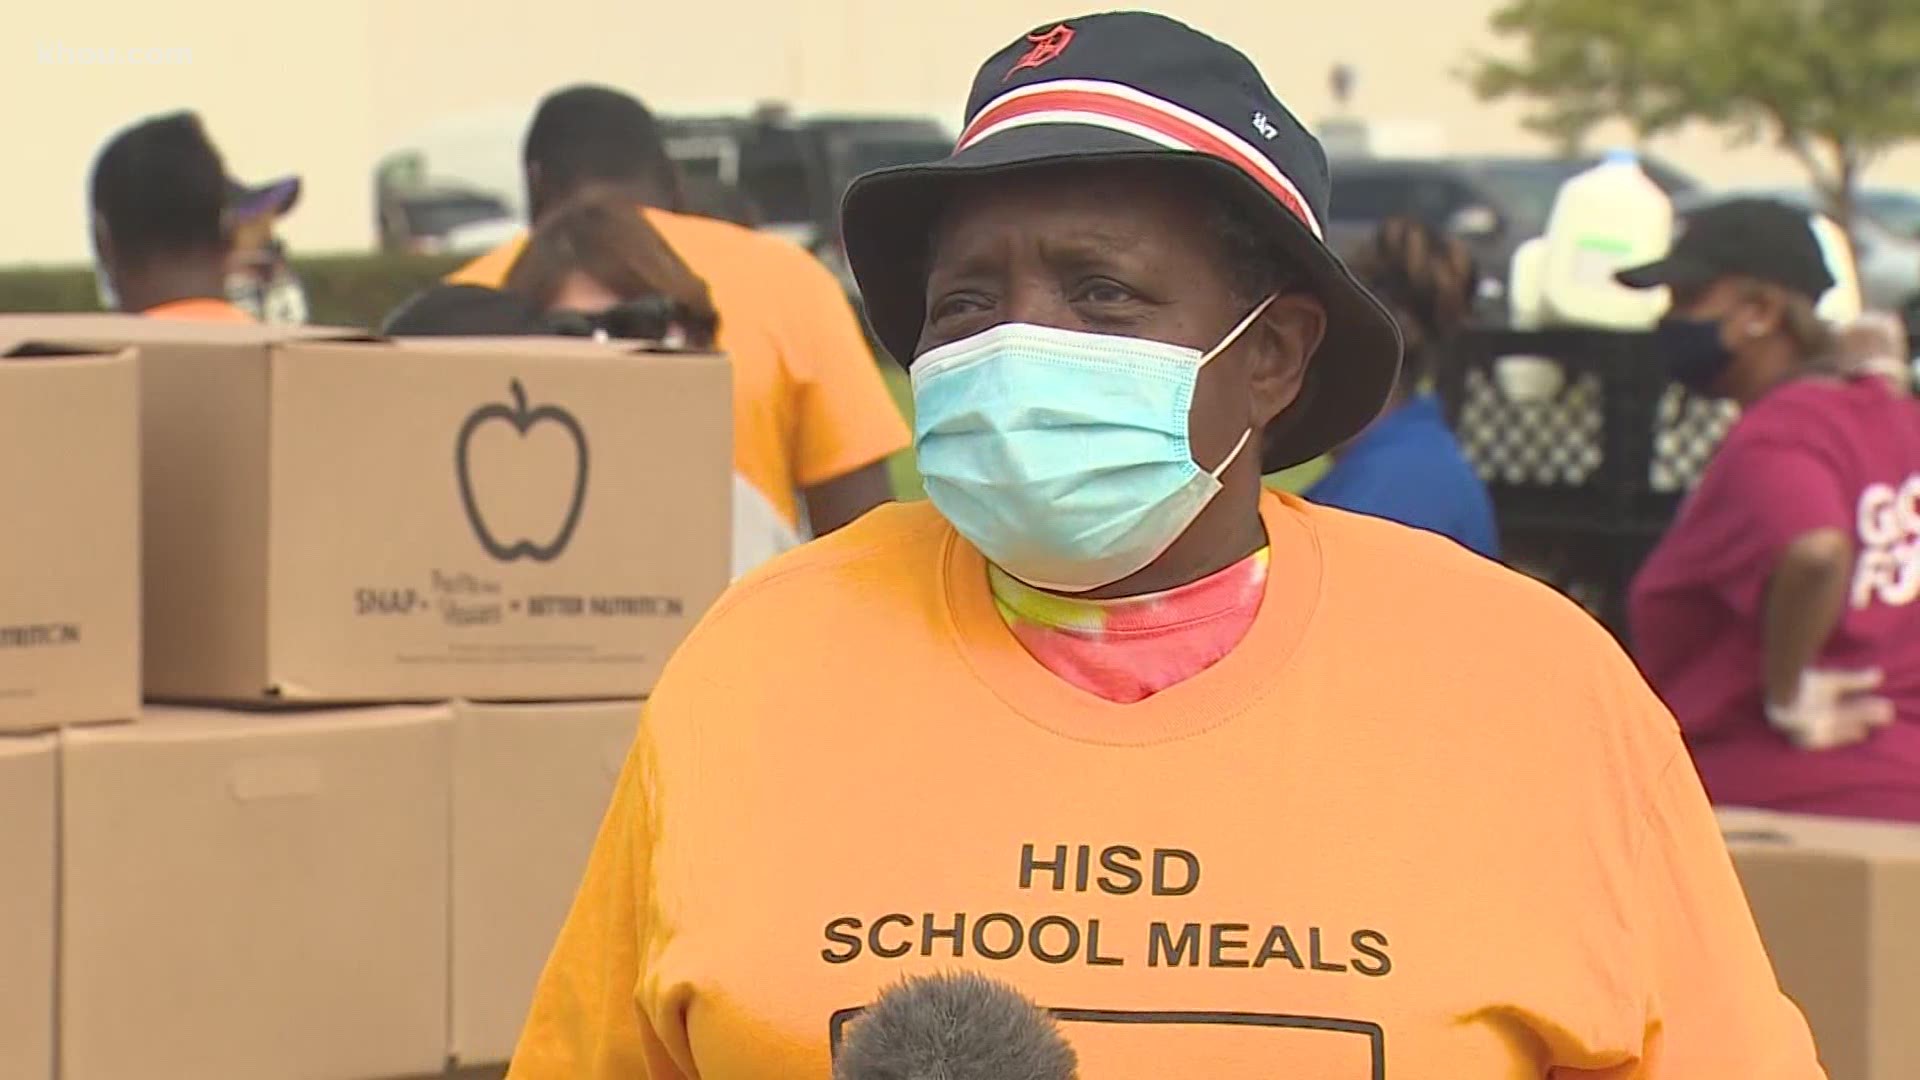 Houston ISD shifted its food distribution to Saturdays to help families affected by the COVID-19 pandemic as cases of the virus rise in Texas and the Houston area.